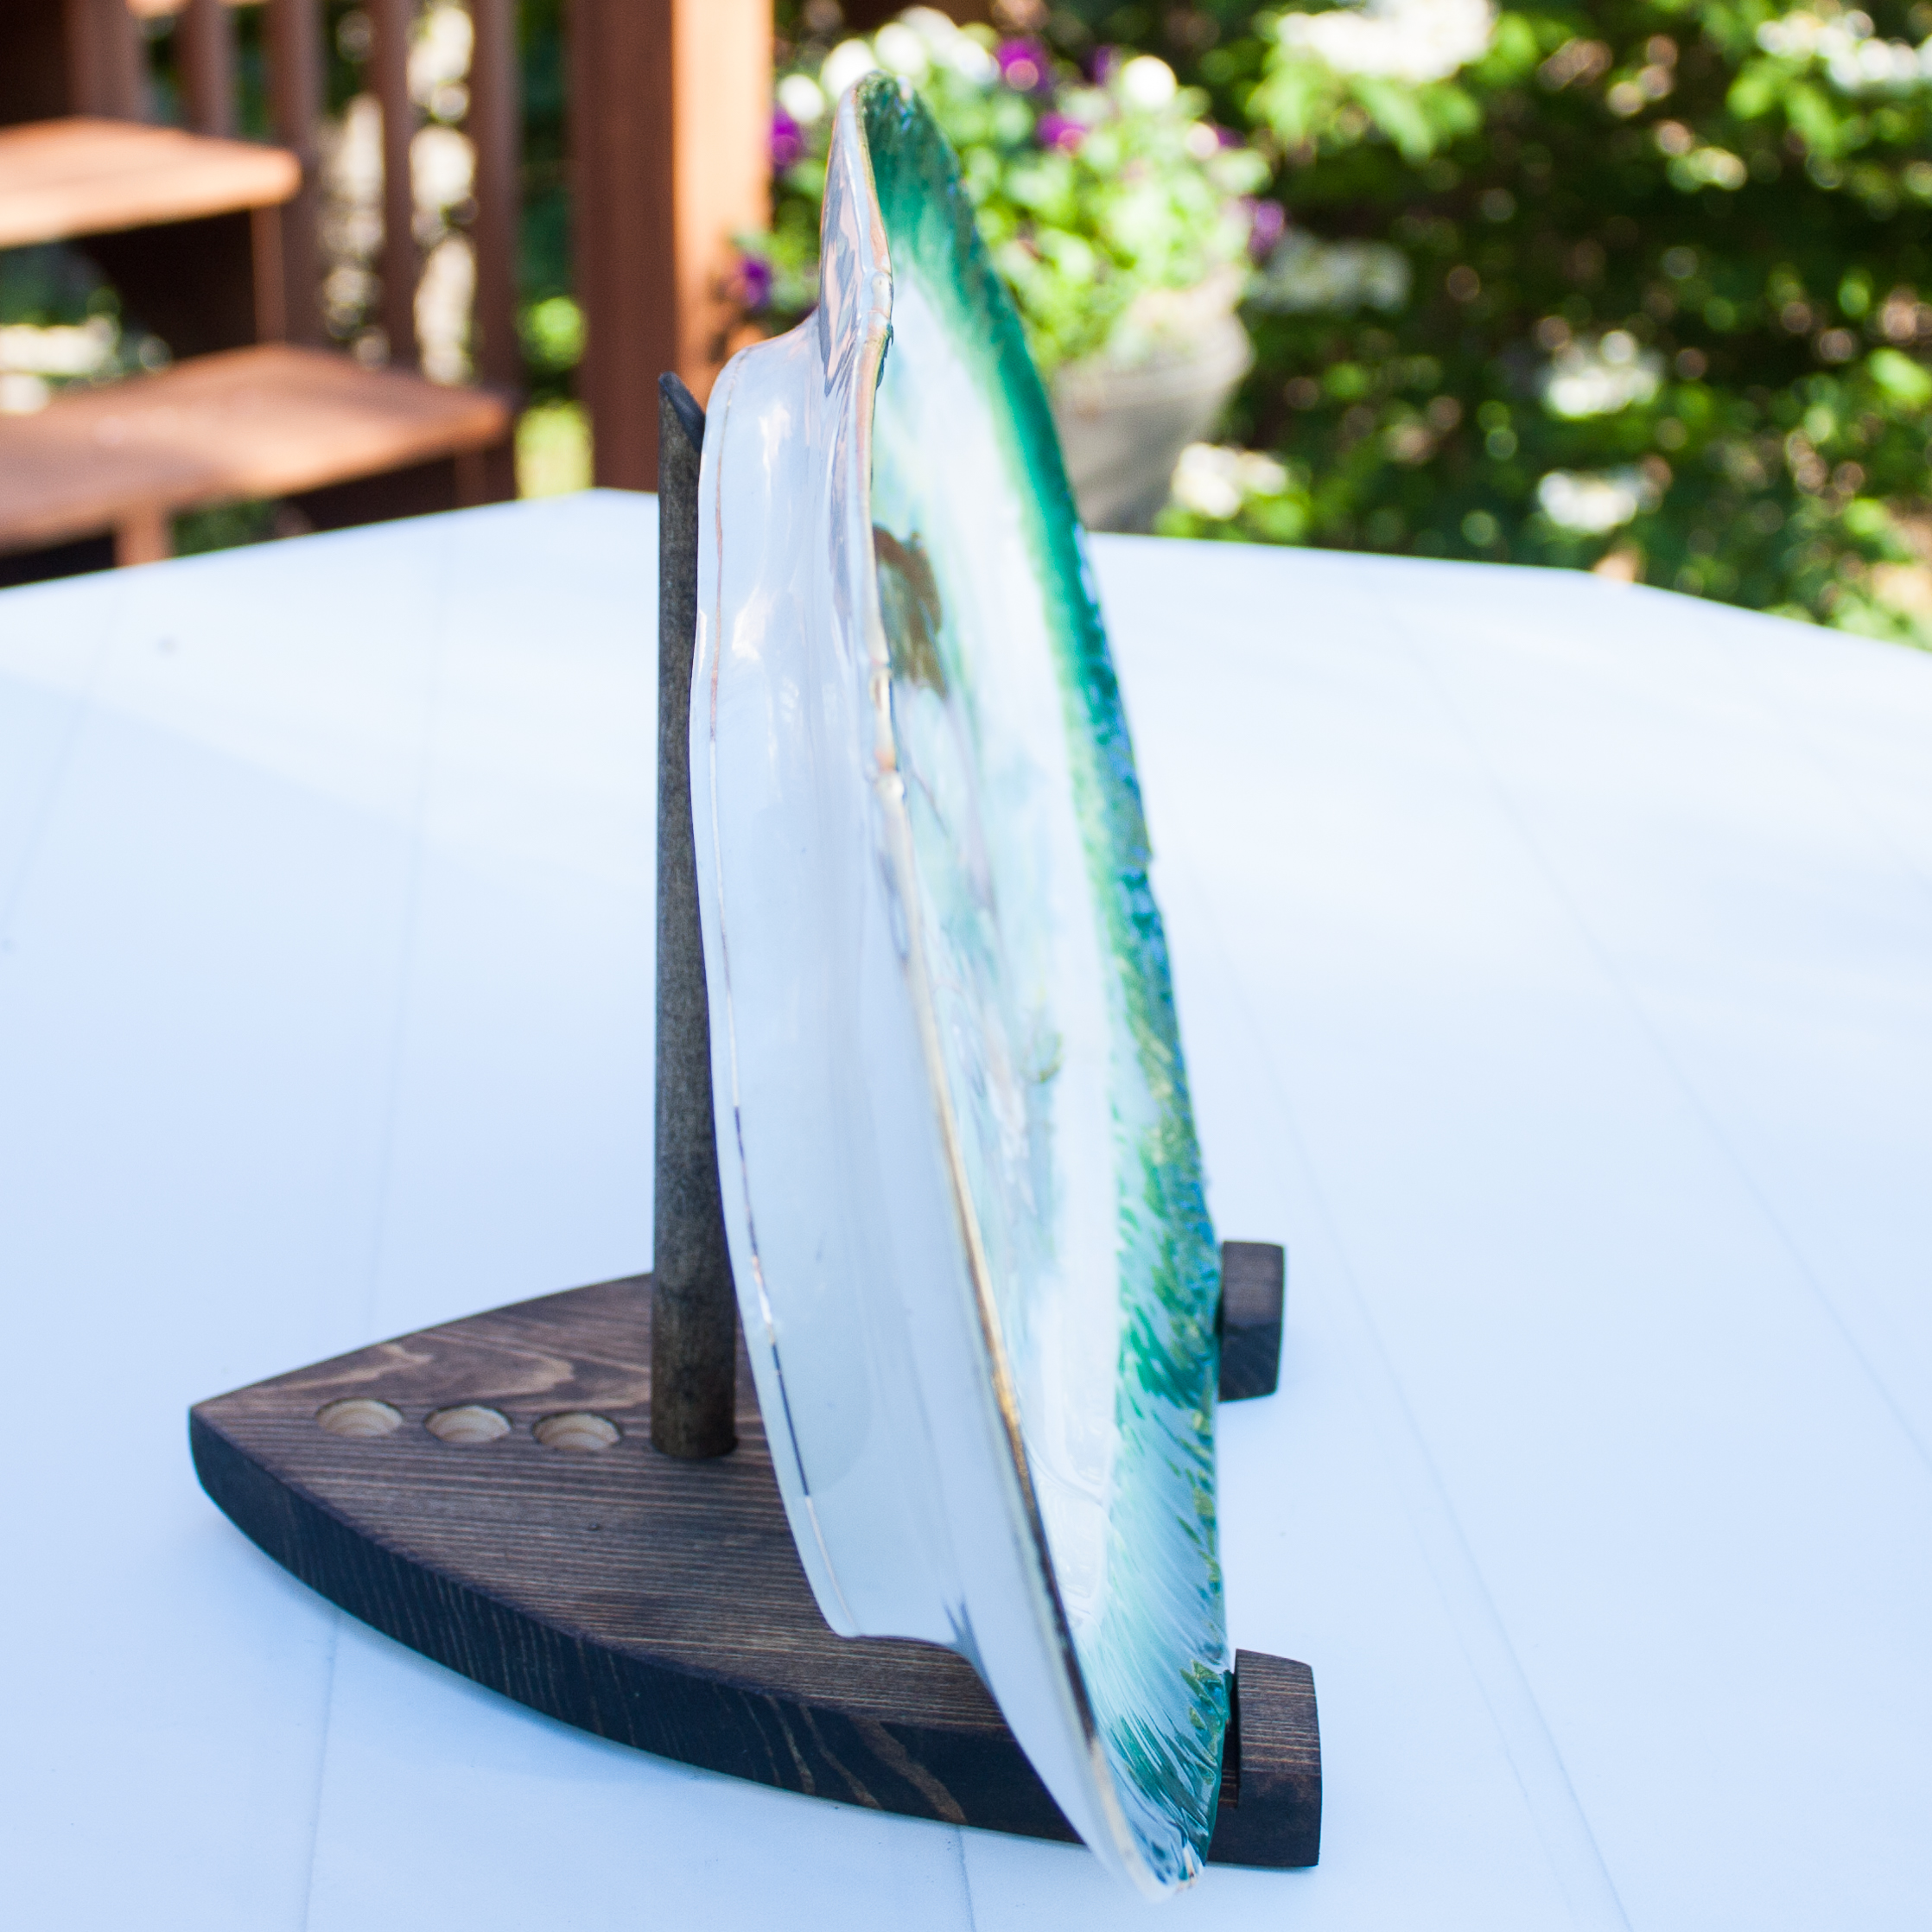 Make a wood plate stand to use to display a plate or art.